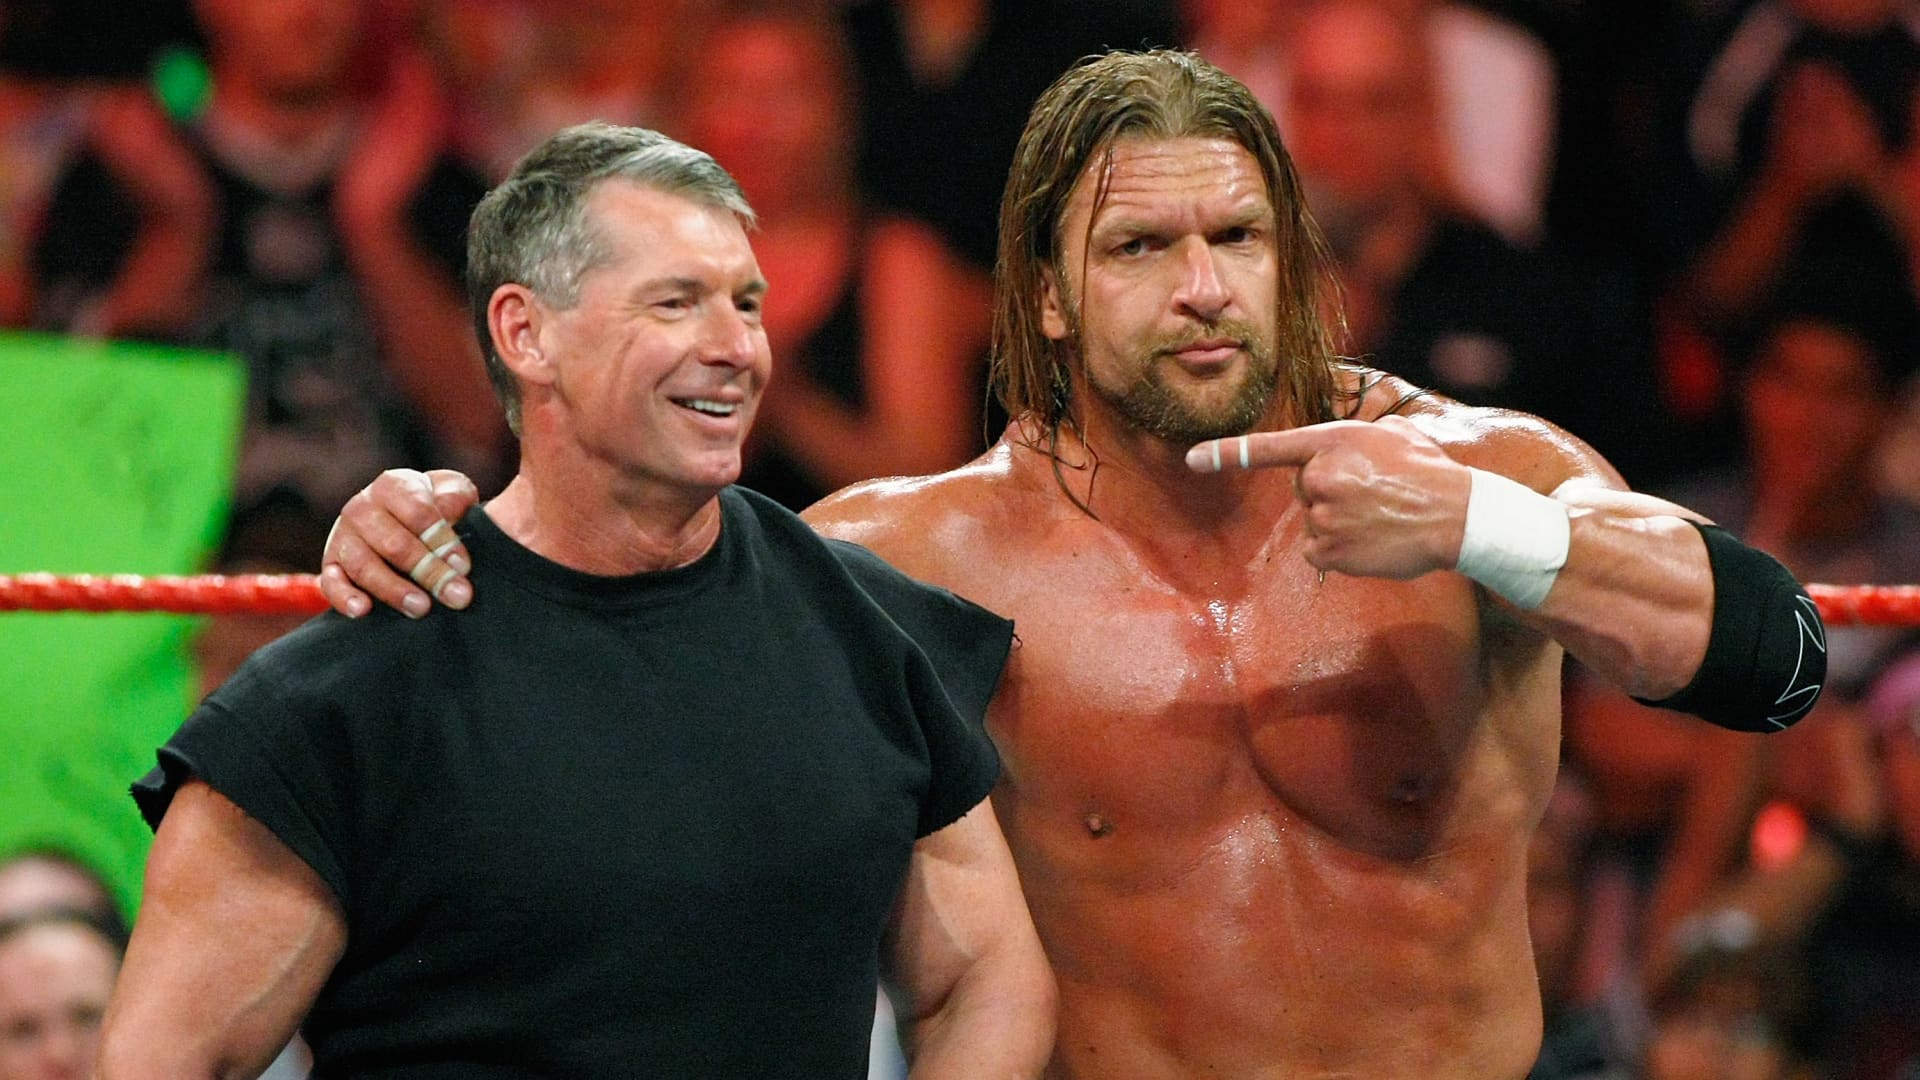 WWE agrees to merge with UFC to create a new company run by Ari Emanuel and Vince McMahon